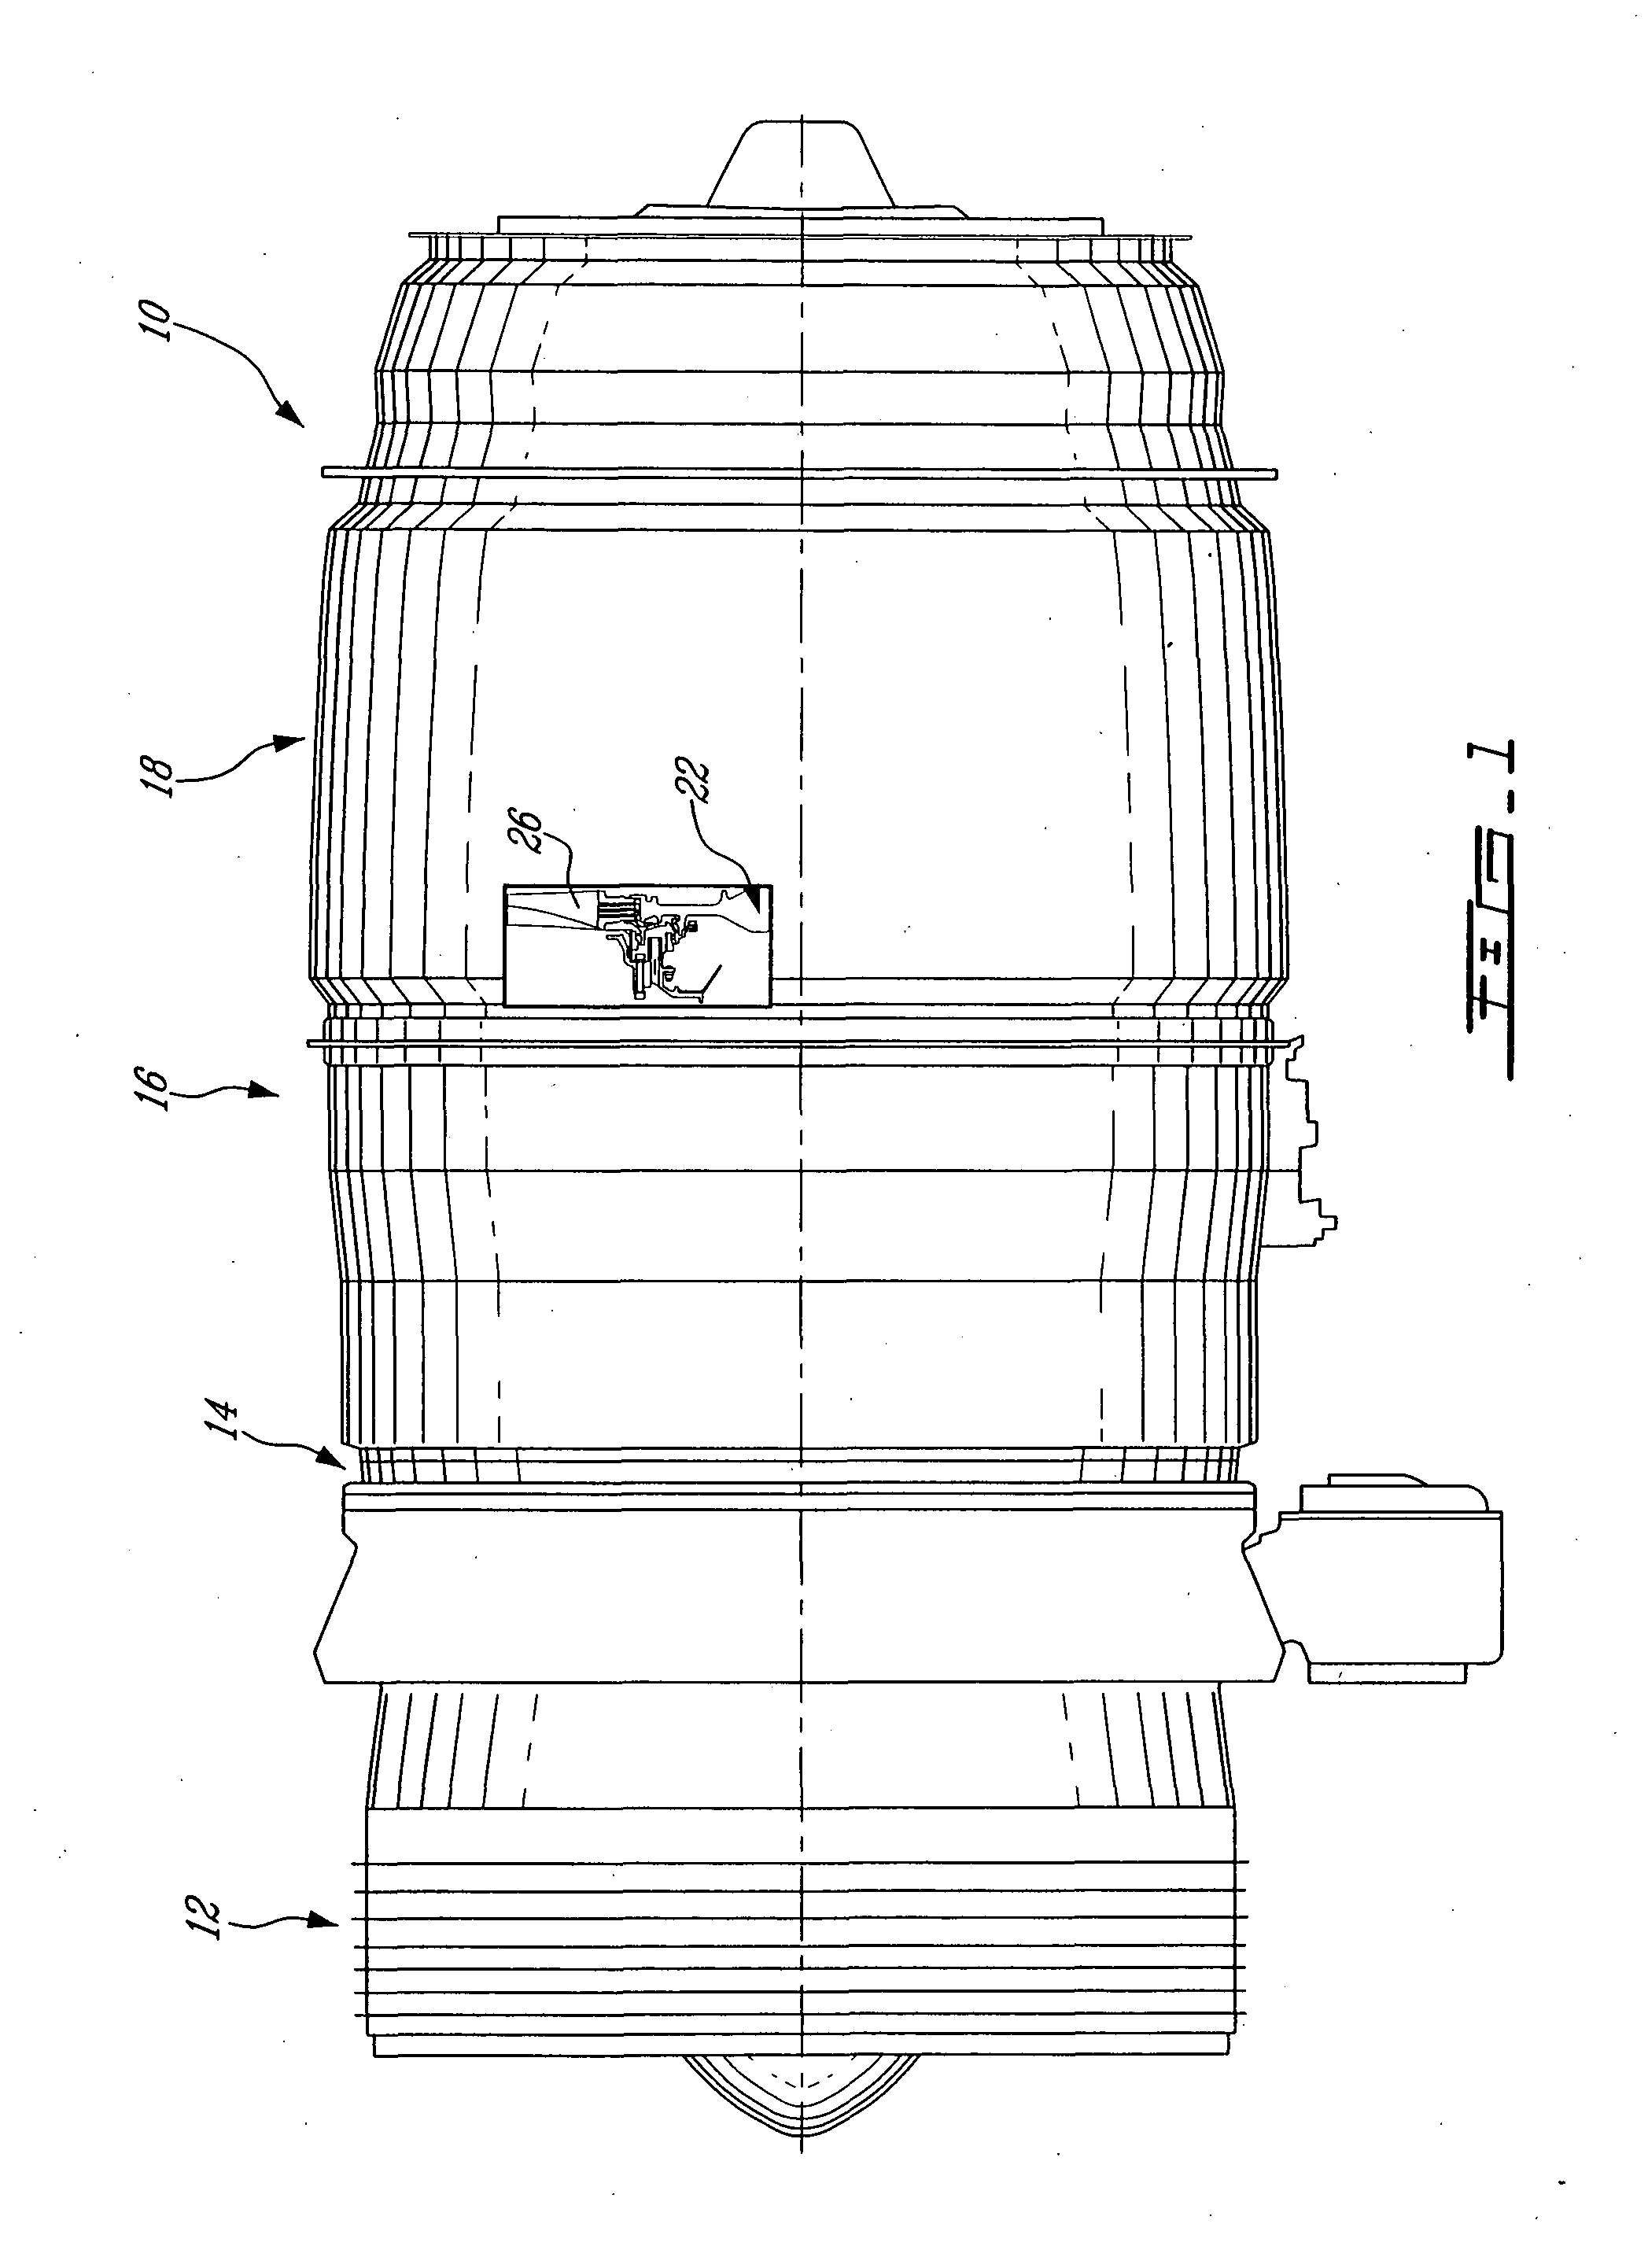 Blade inlet cooling flow deflector apparatus and method